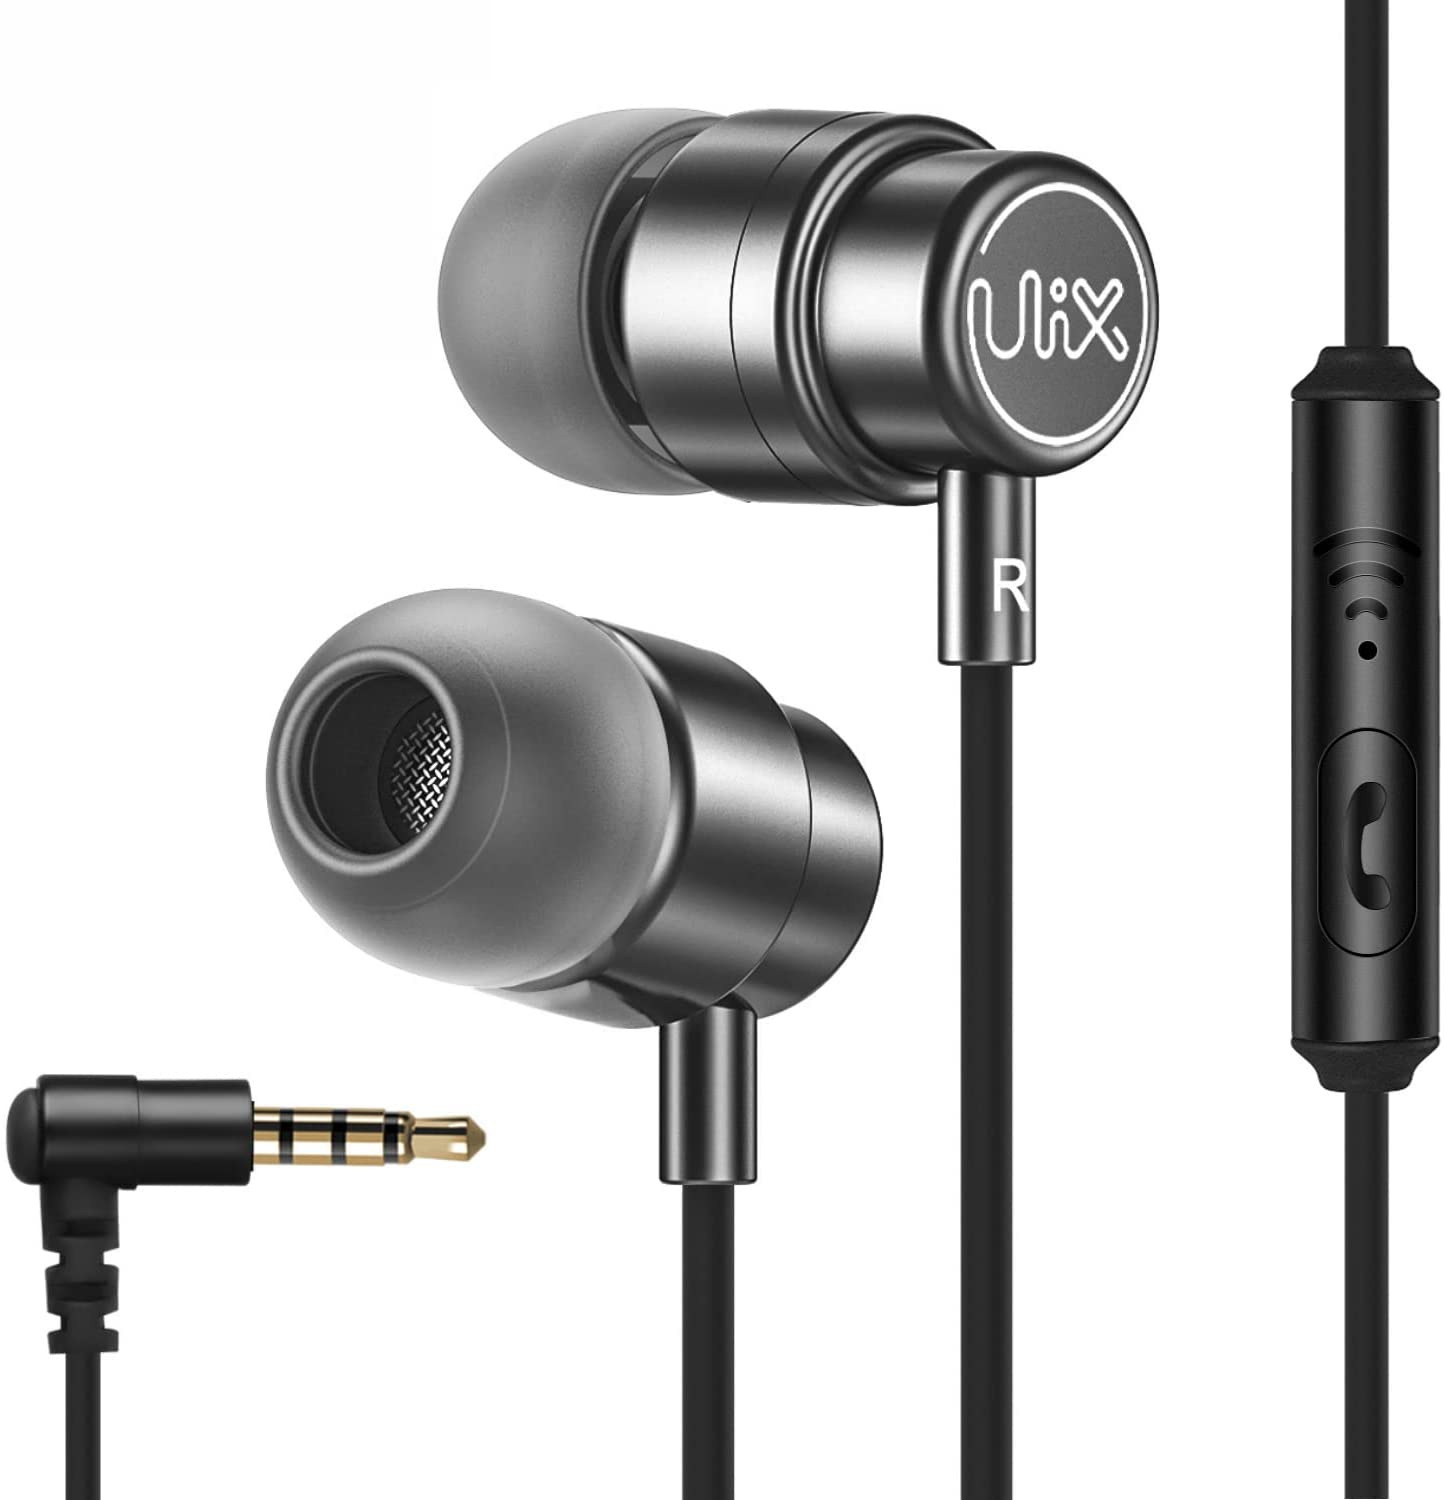 ULIX Rider Wired Earbuds with Microphone - Wired Earphones with Microphone - 5 Y